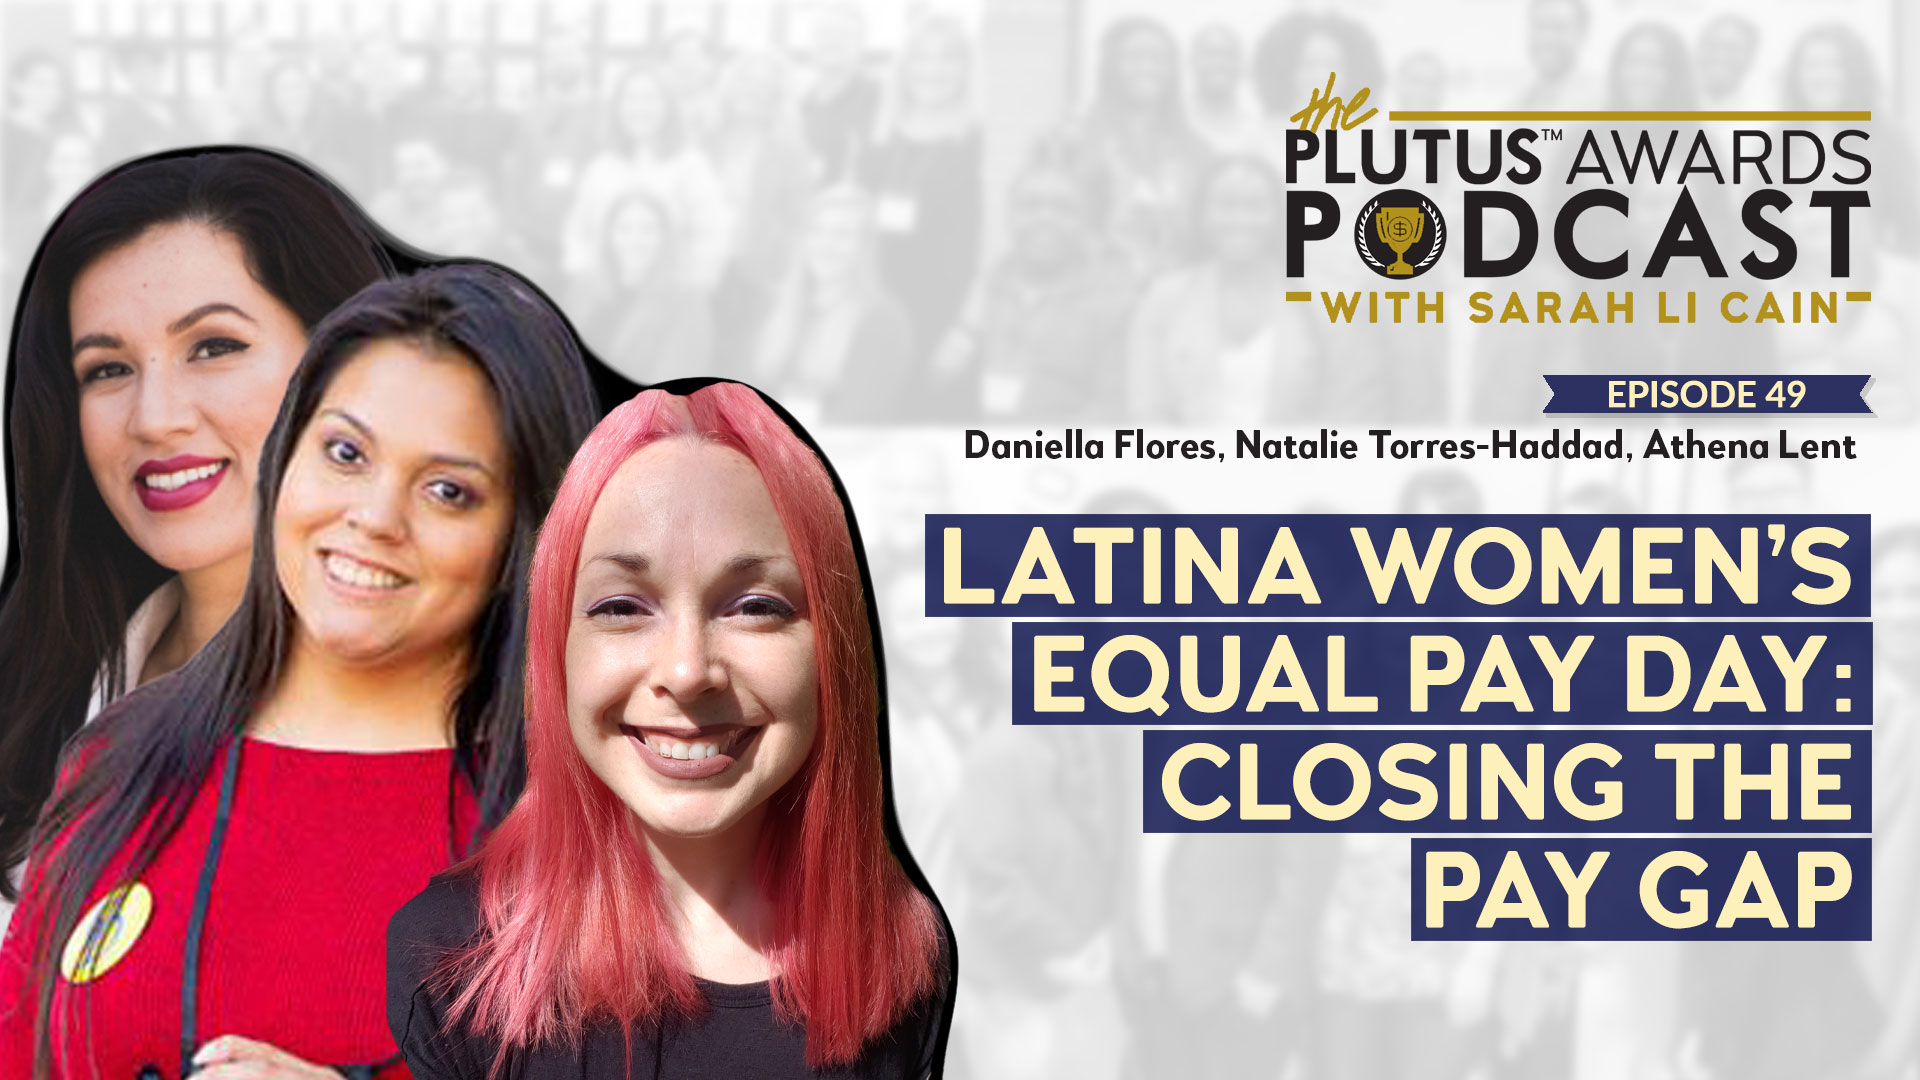 Plutus Awards Podcast - Latina Women's Equal Pay Day Featured Image